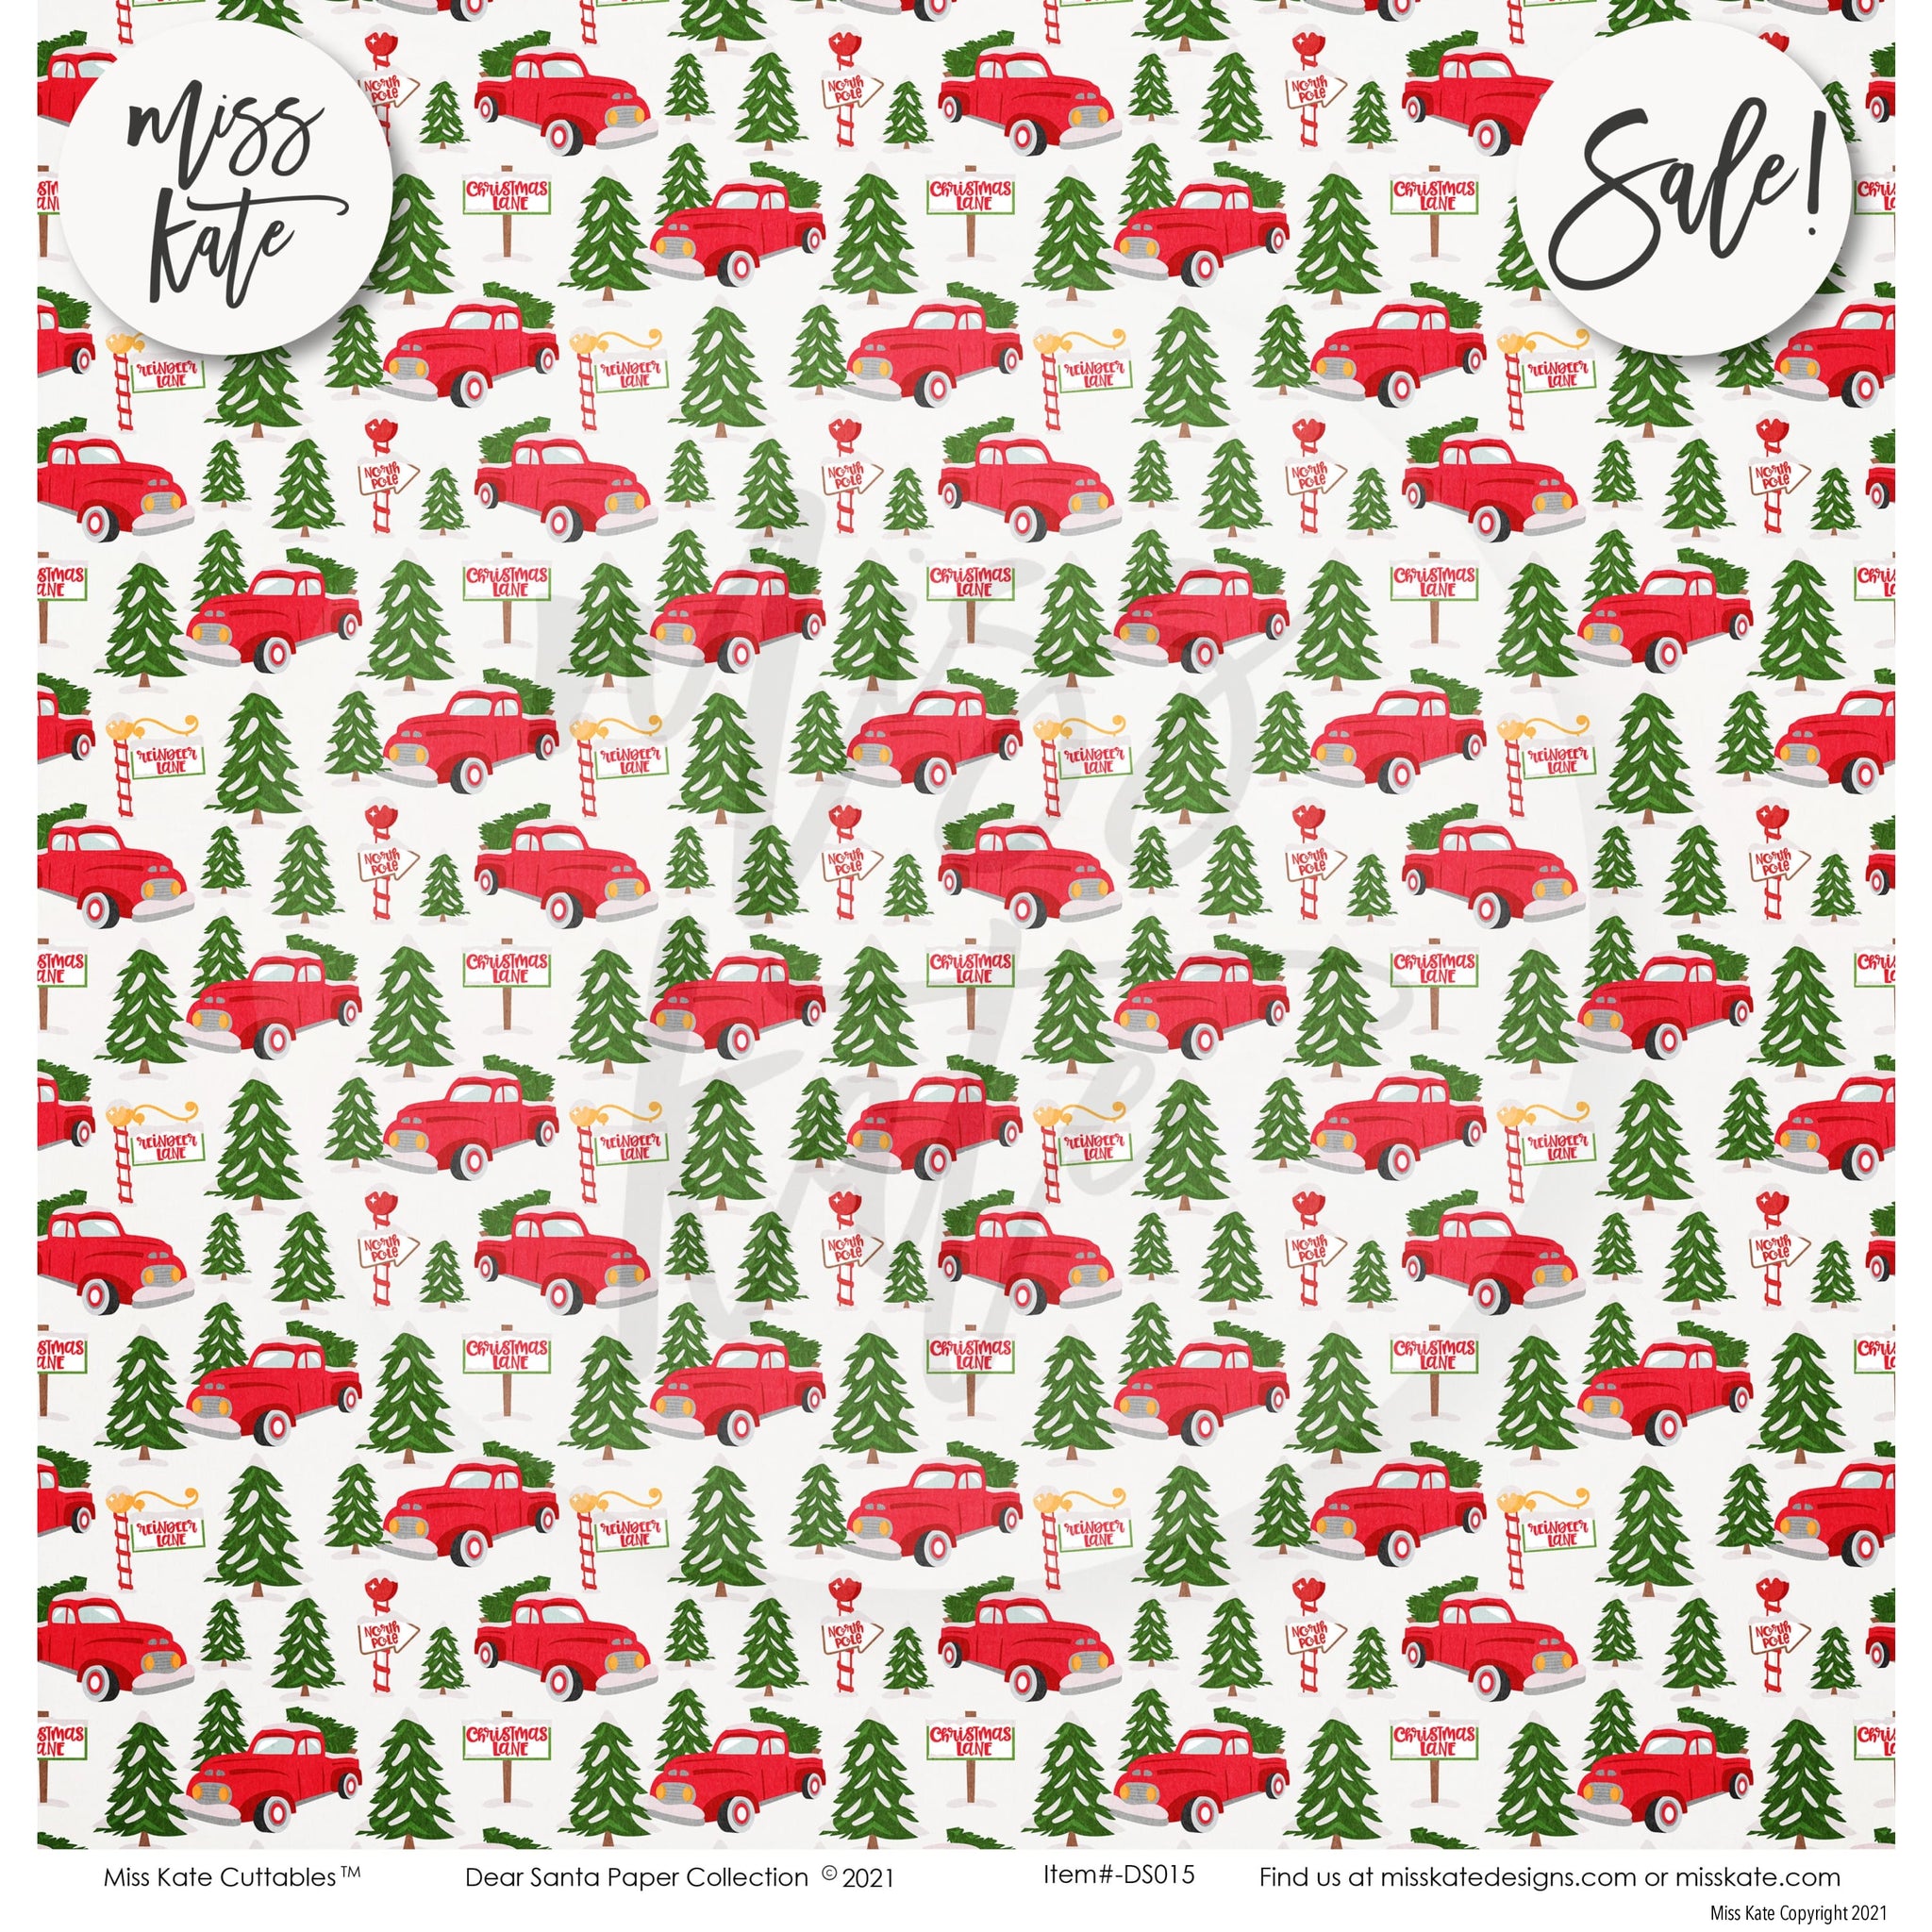 Dear Santa Wrapping Paper — Rebecca Jane Woolbright 2.0, Wrapping Paper Tape